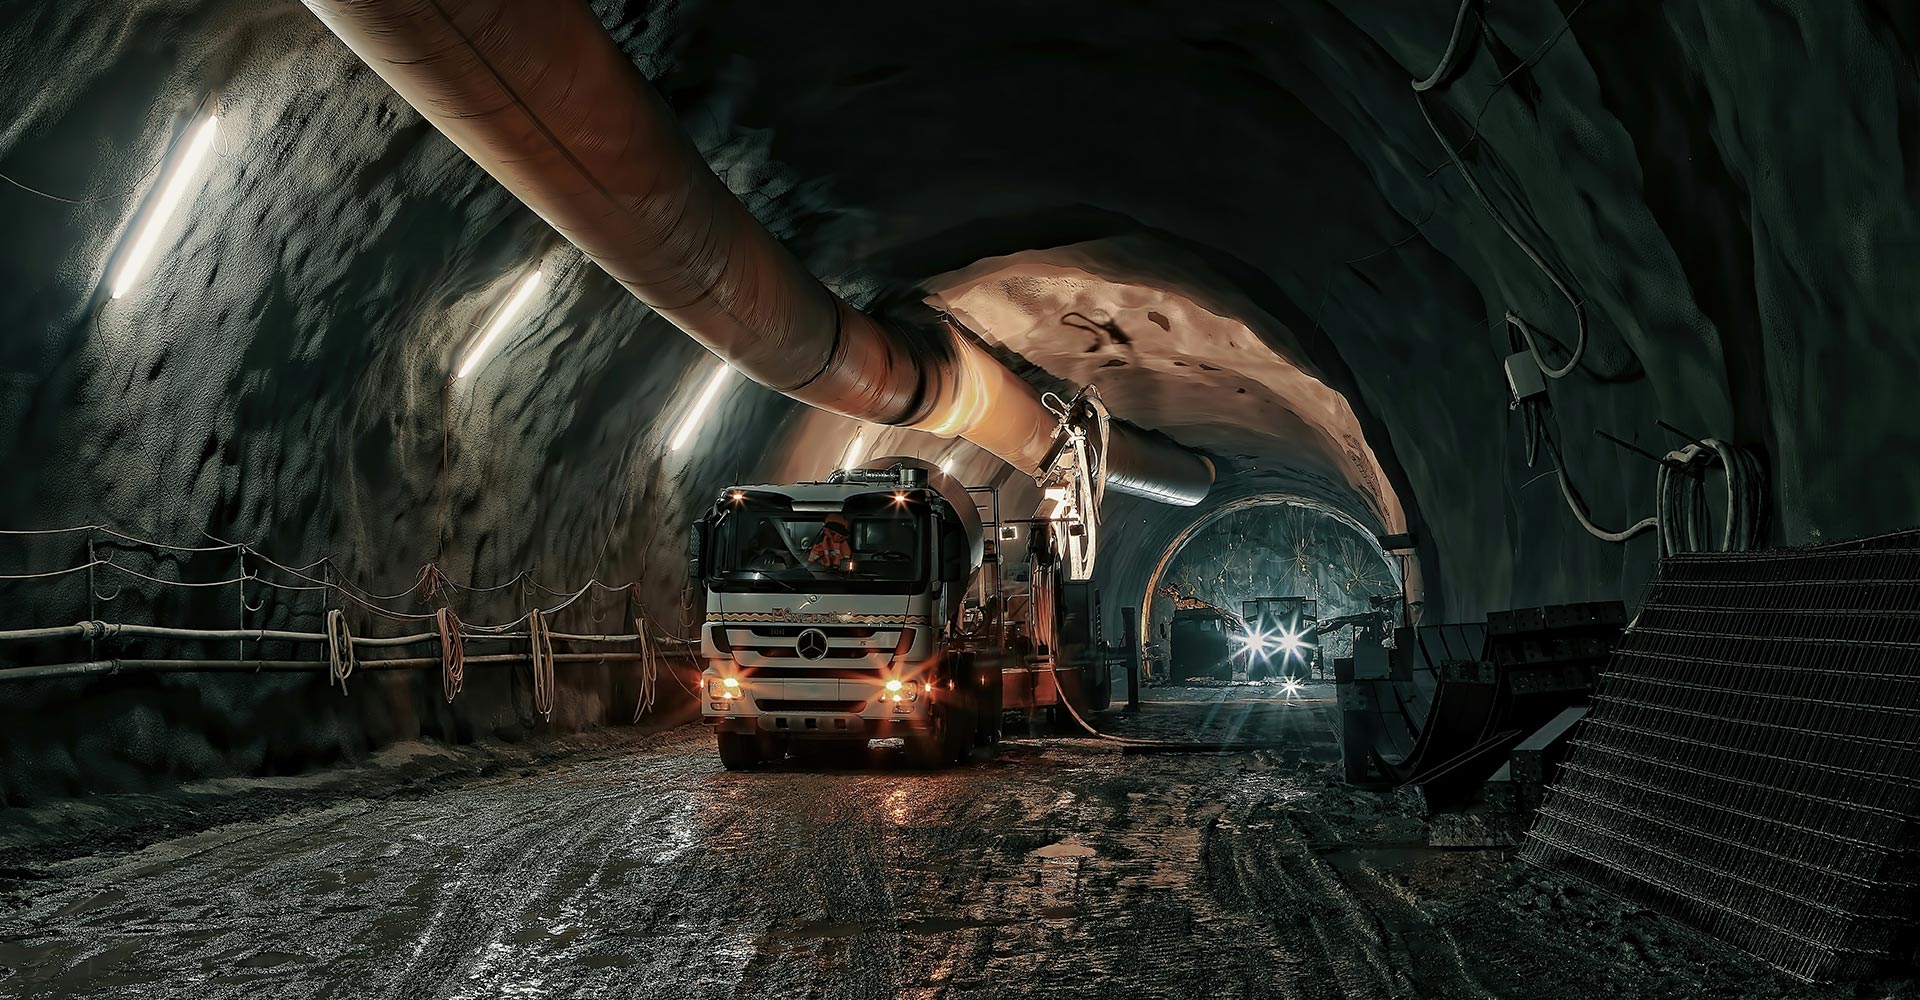 A large tunnel with illuminated light strips, where industrial vehicles operate on the muddy ground. A truck with equipment attached is prominent, displaying headlights and work lights.